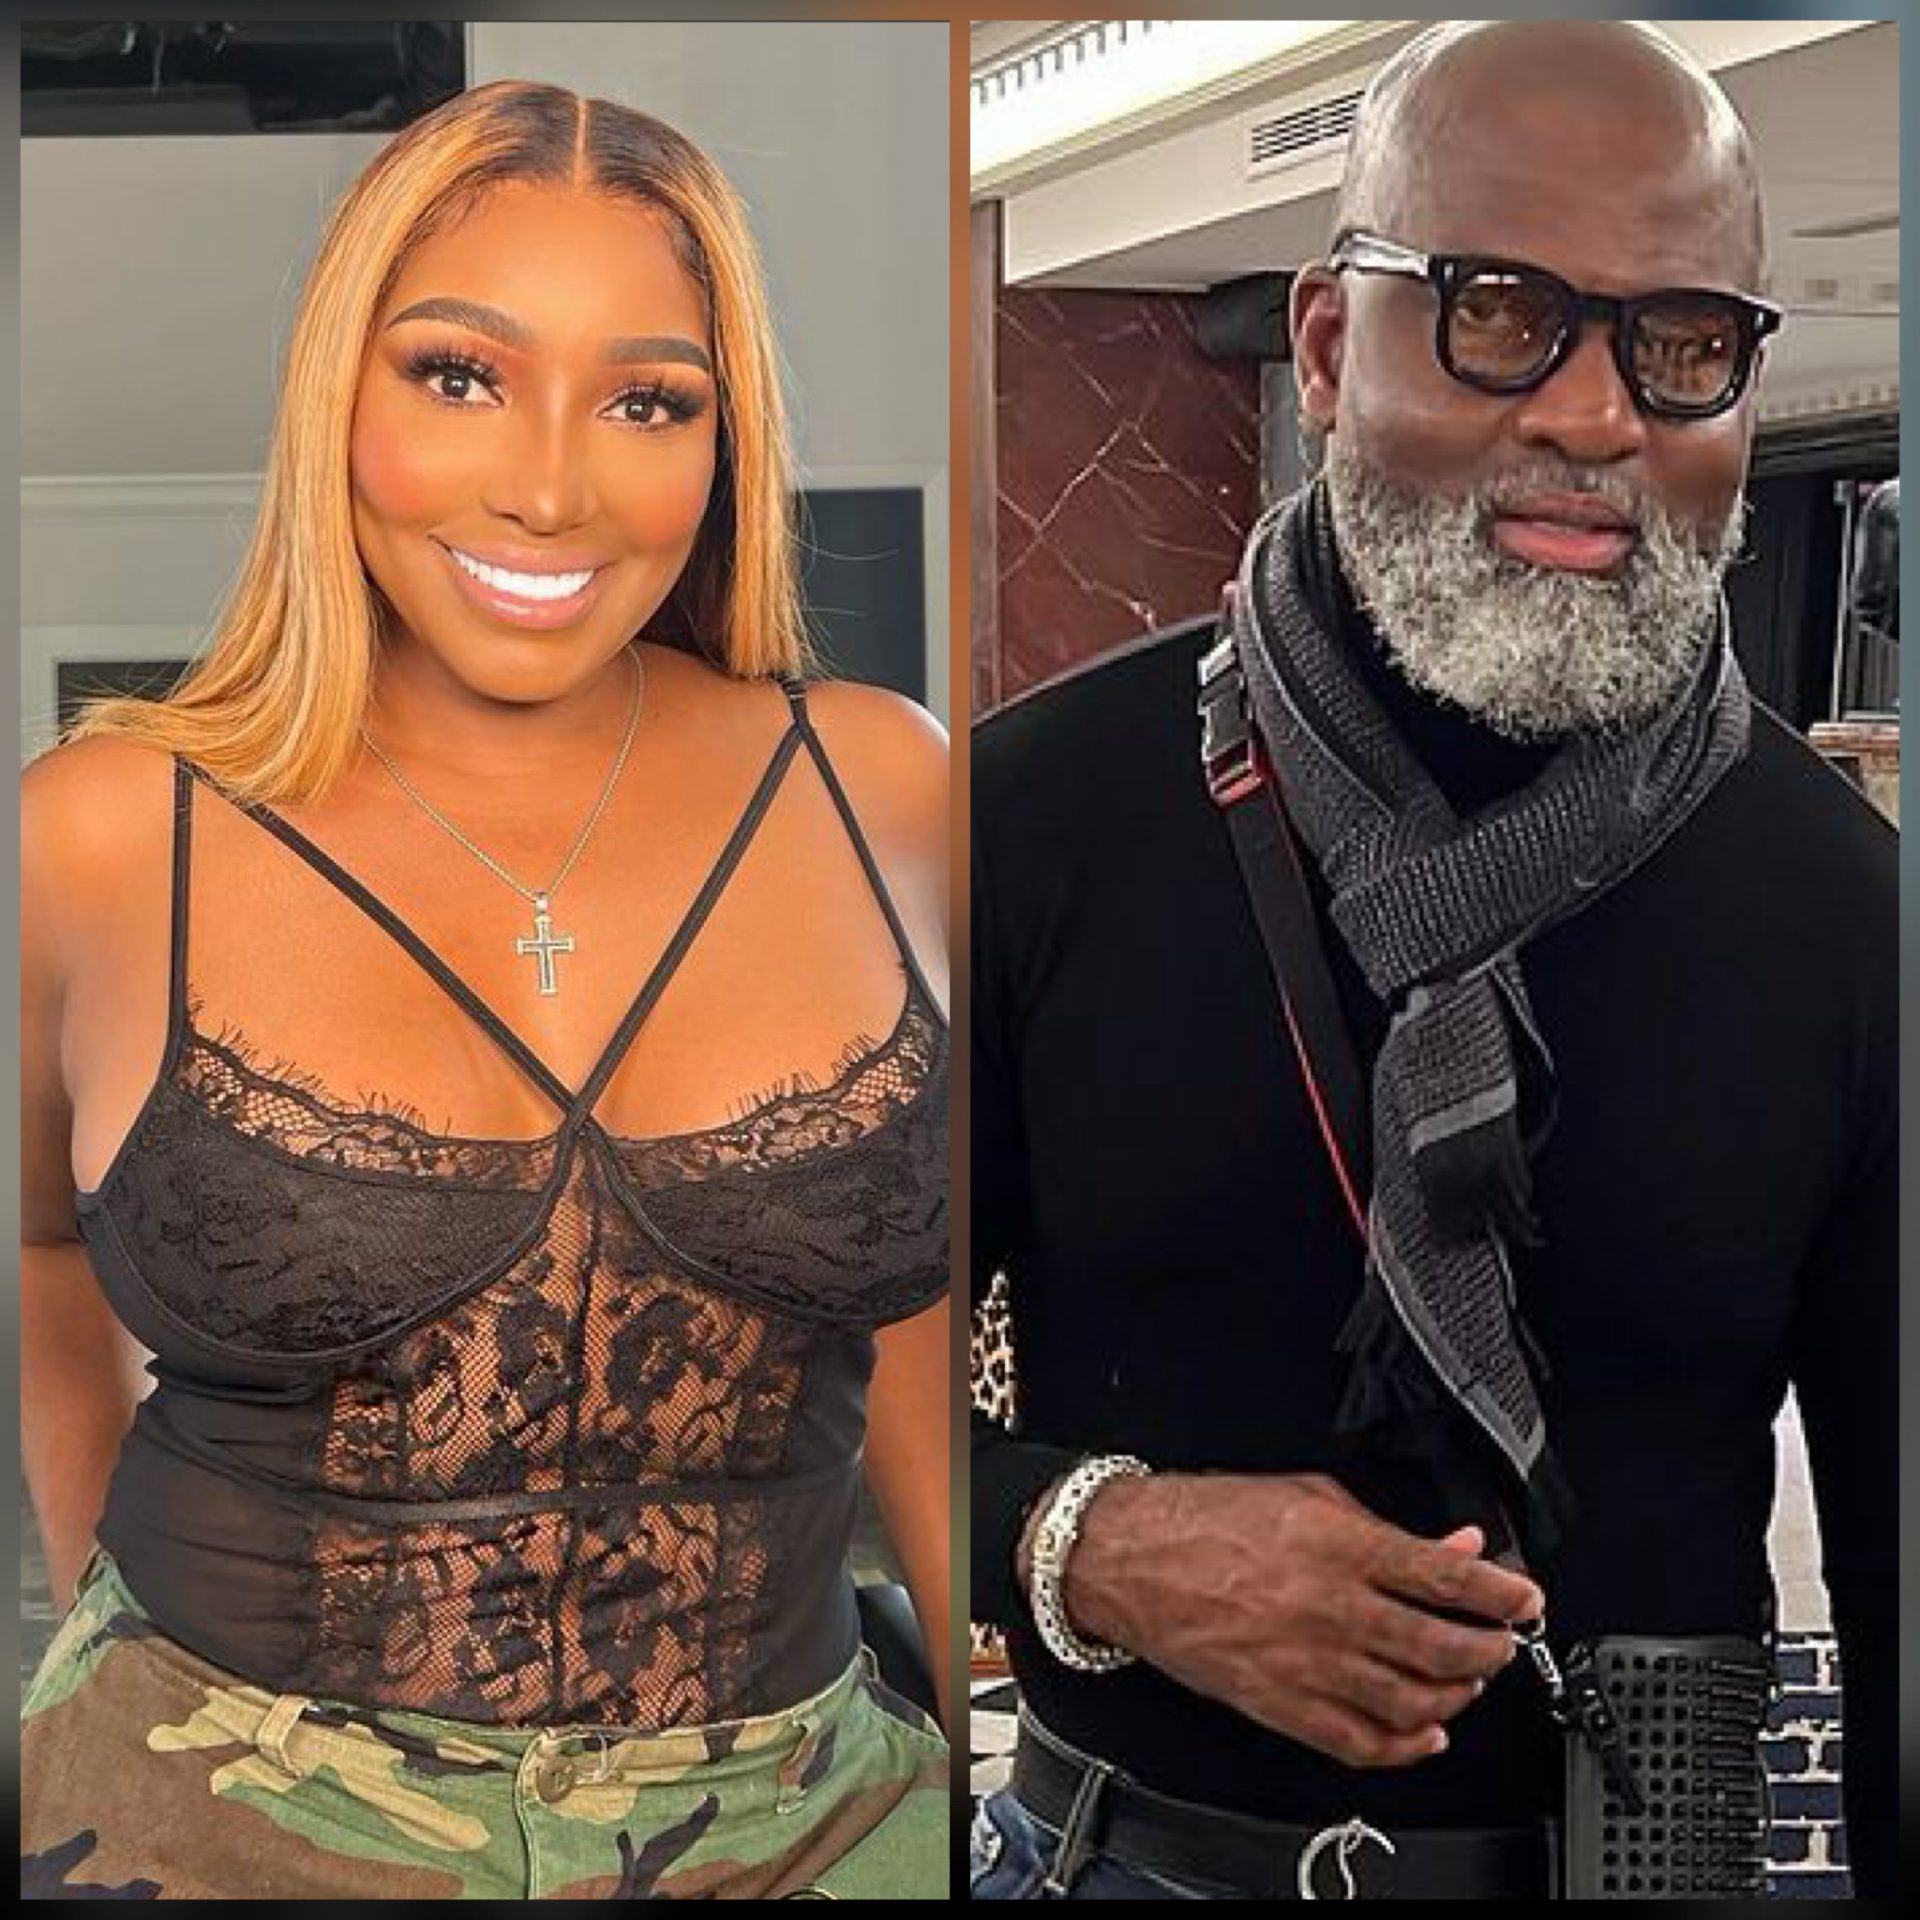 NeNe Leakes And Boyfriend Nyoni Sioh Celebrate Their Love With A Baecation To Ghana NeNe Leakes and Nyoni Sioh scaled  NeNe Leakes And Boyfriend Nyoni Sioh Celebrate Their Love With A Baecation To Ghana #NeNe Leakes NeNe Leakes and Nyoni Sioh scaled